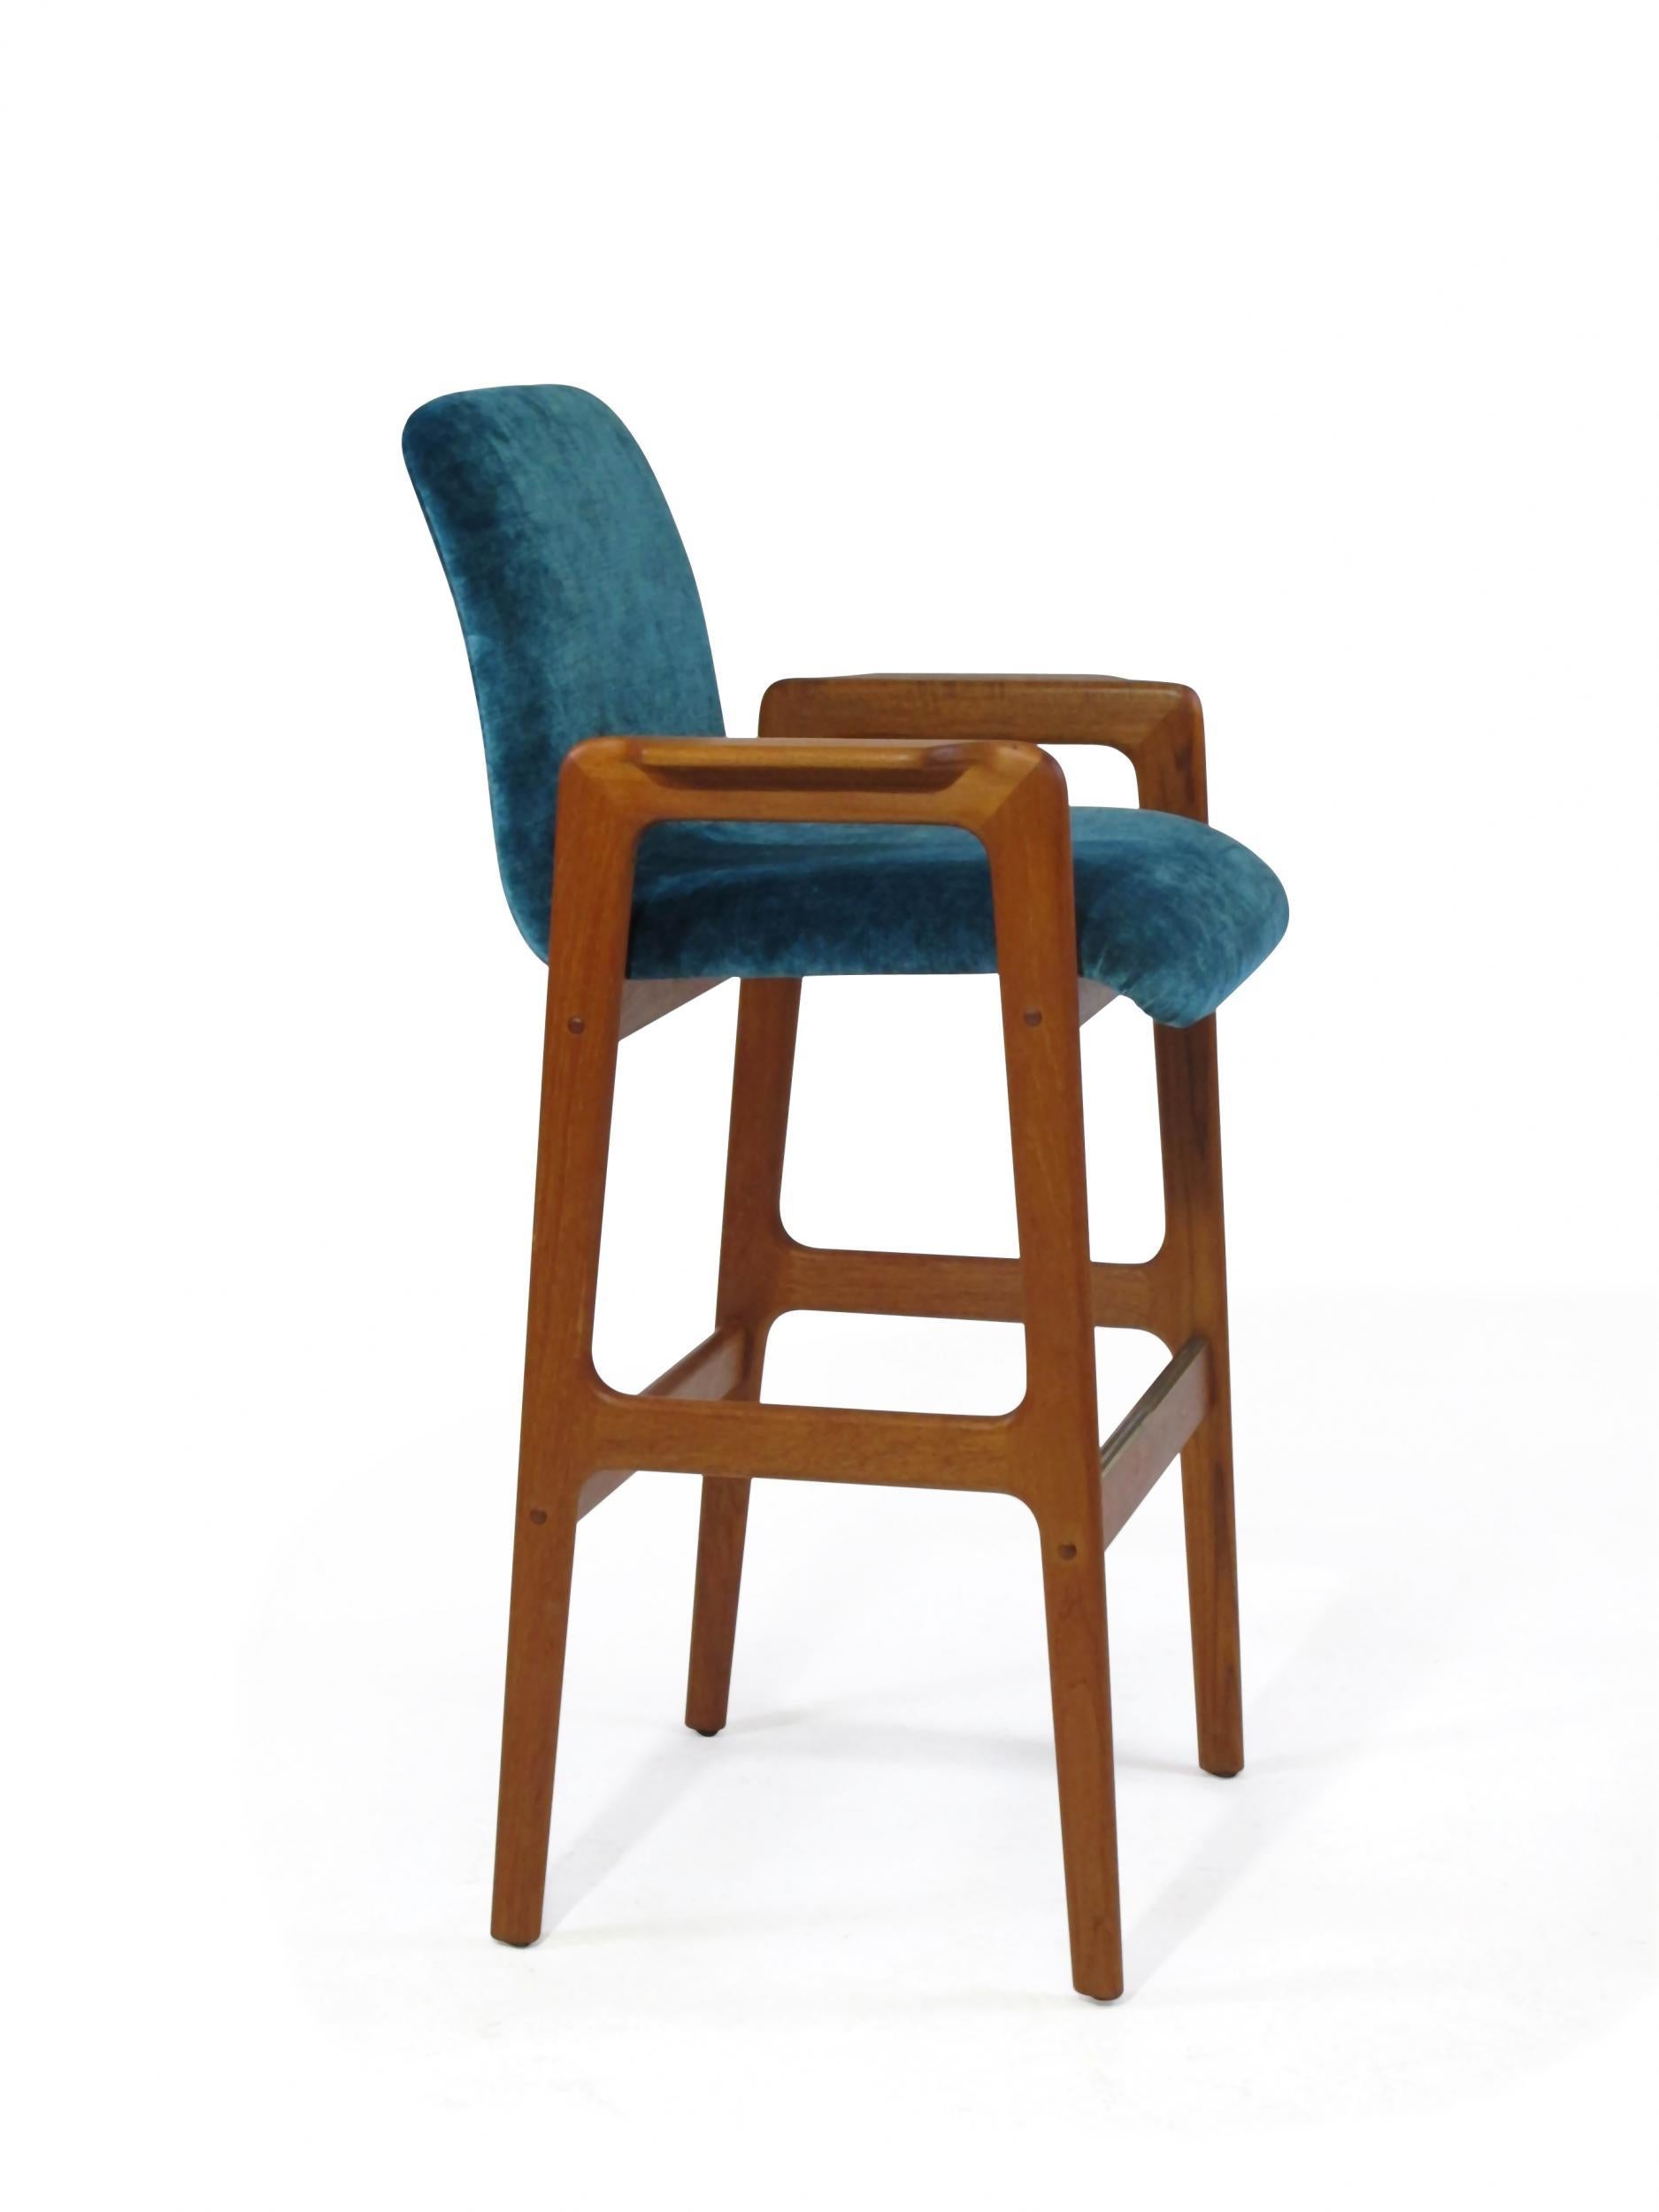 Midcentury teak bar stools, circa 1970, crafted of solid teak frames with armrest newly upholstered in a turquoise velvet.